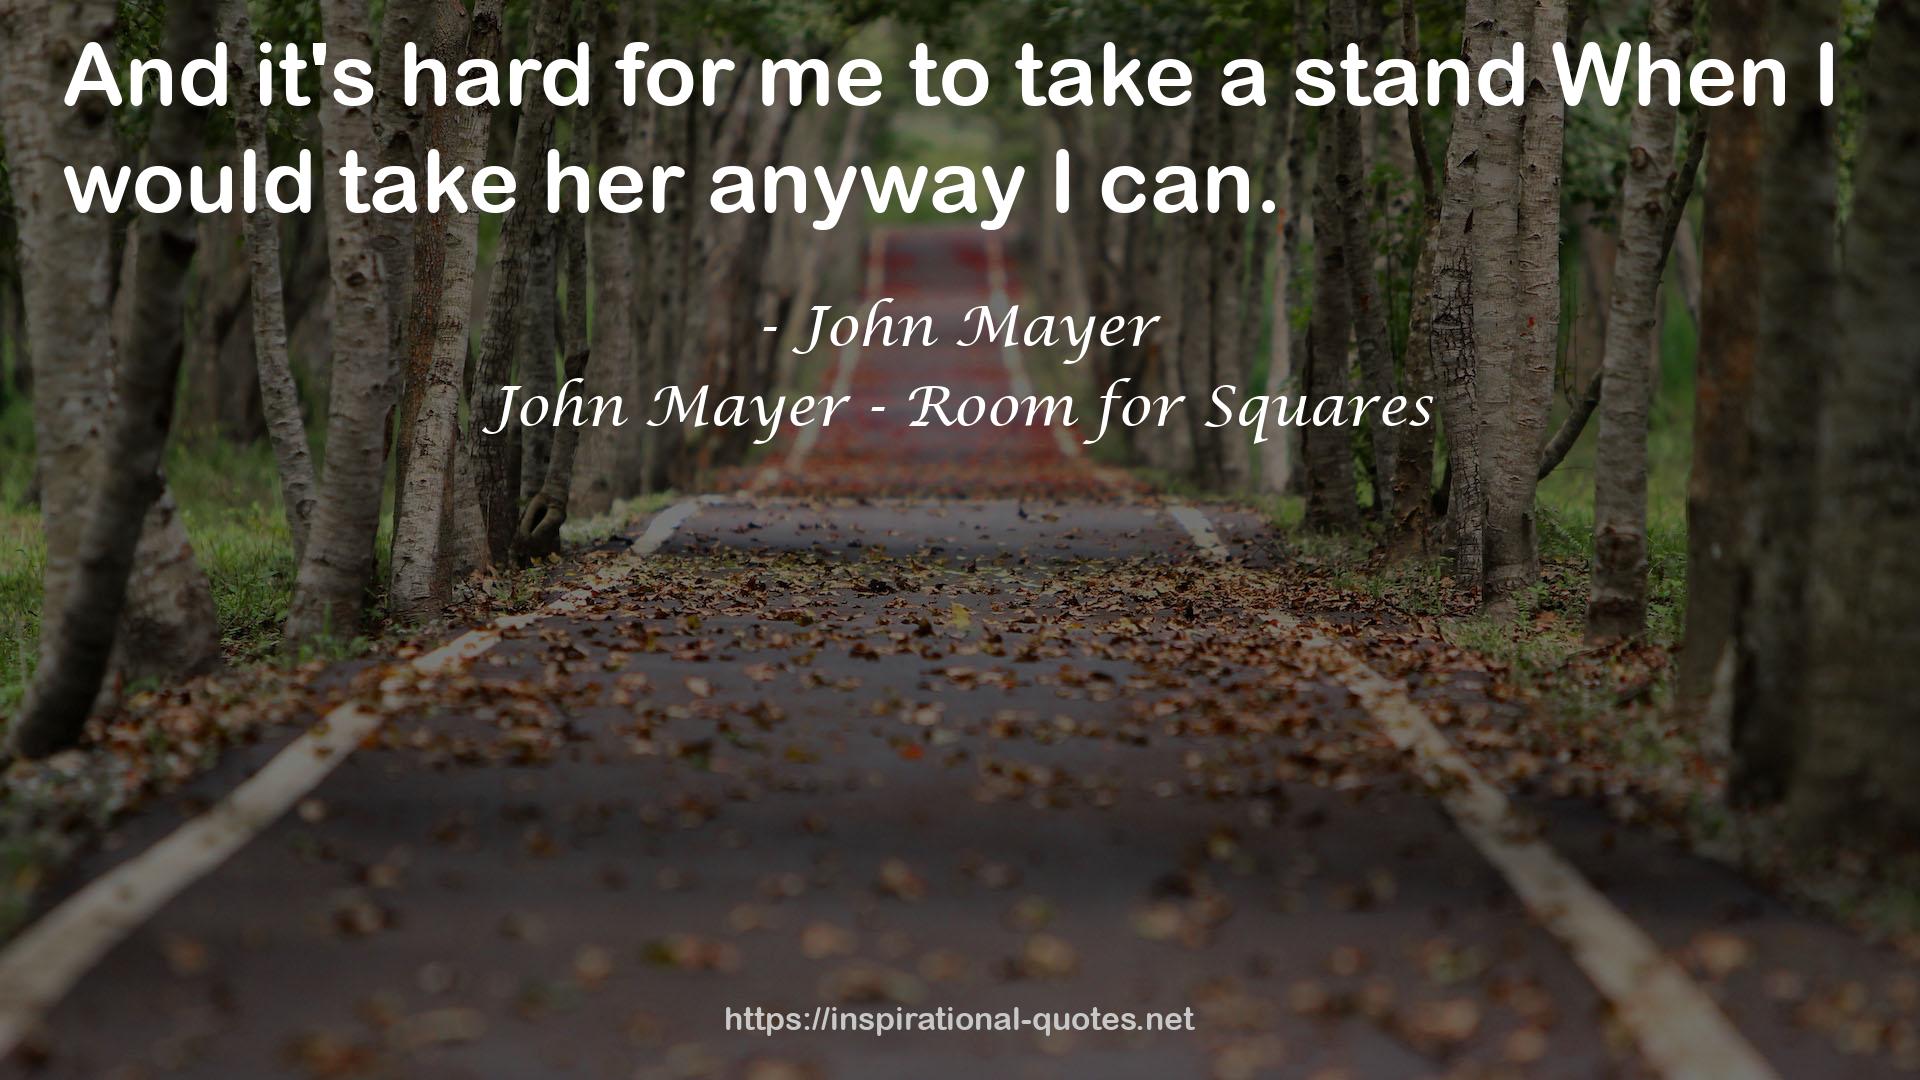 John Mayer - Room for Squares QUOTES